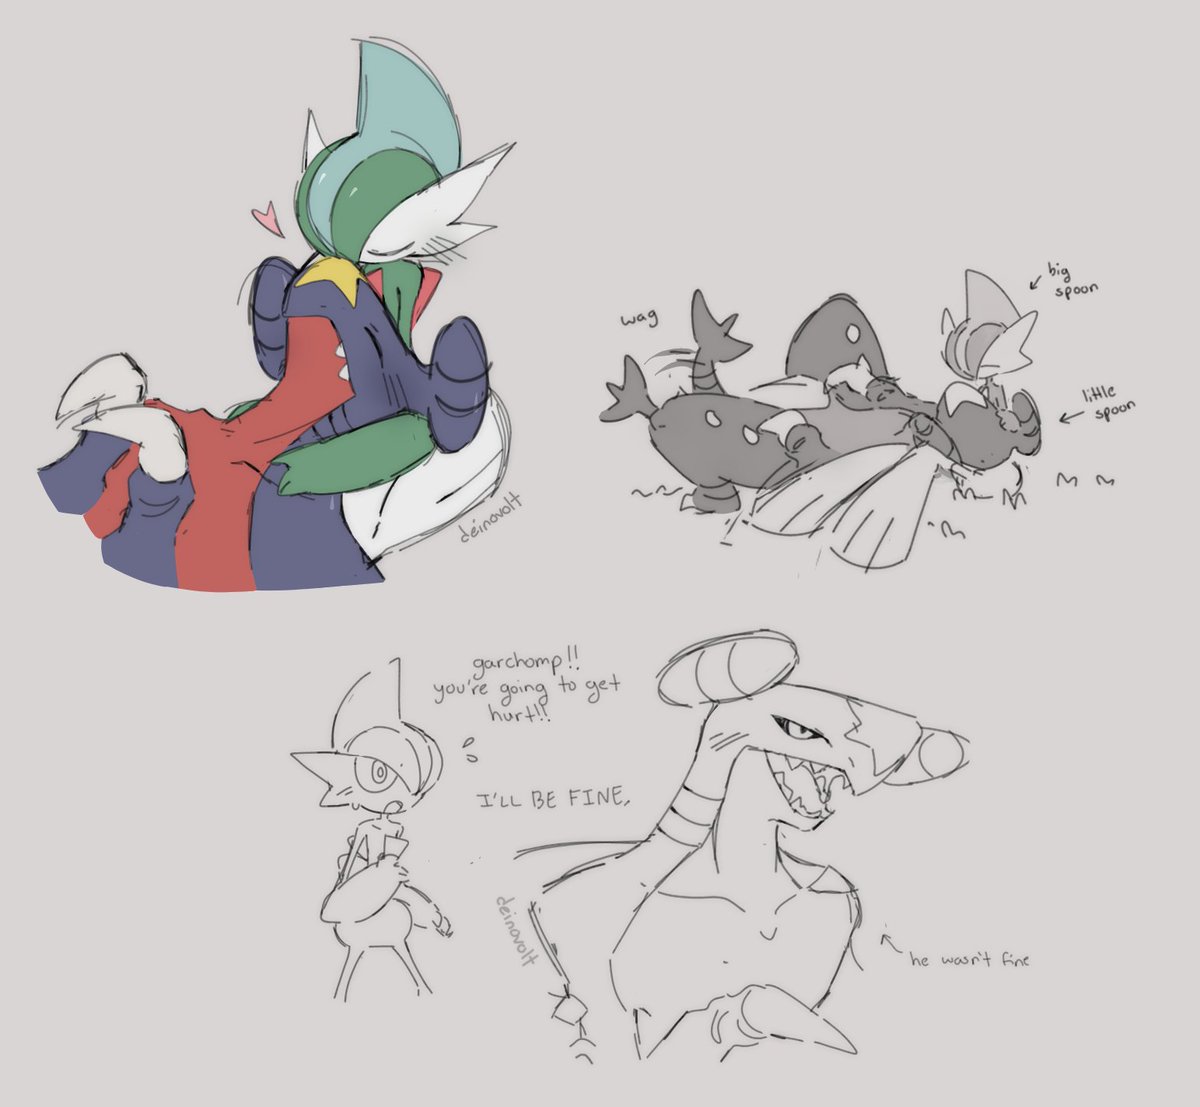 couldn't contain myself and explained their dynamic

#gallade #garchomp #pokemonfanart #ポケモンイラスト #gallchomp um..